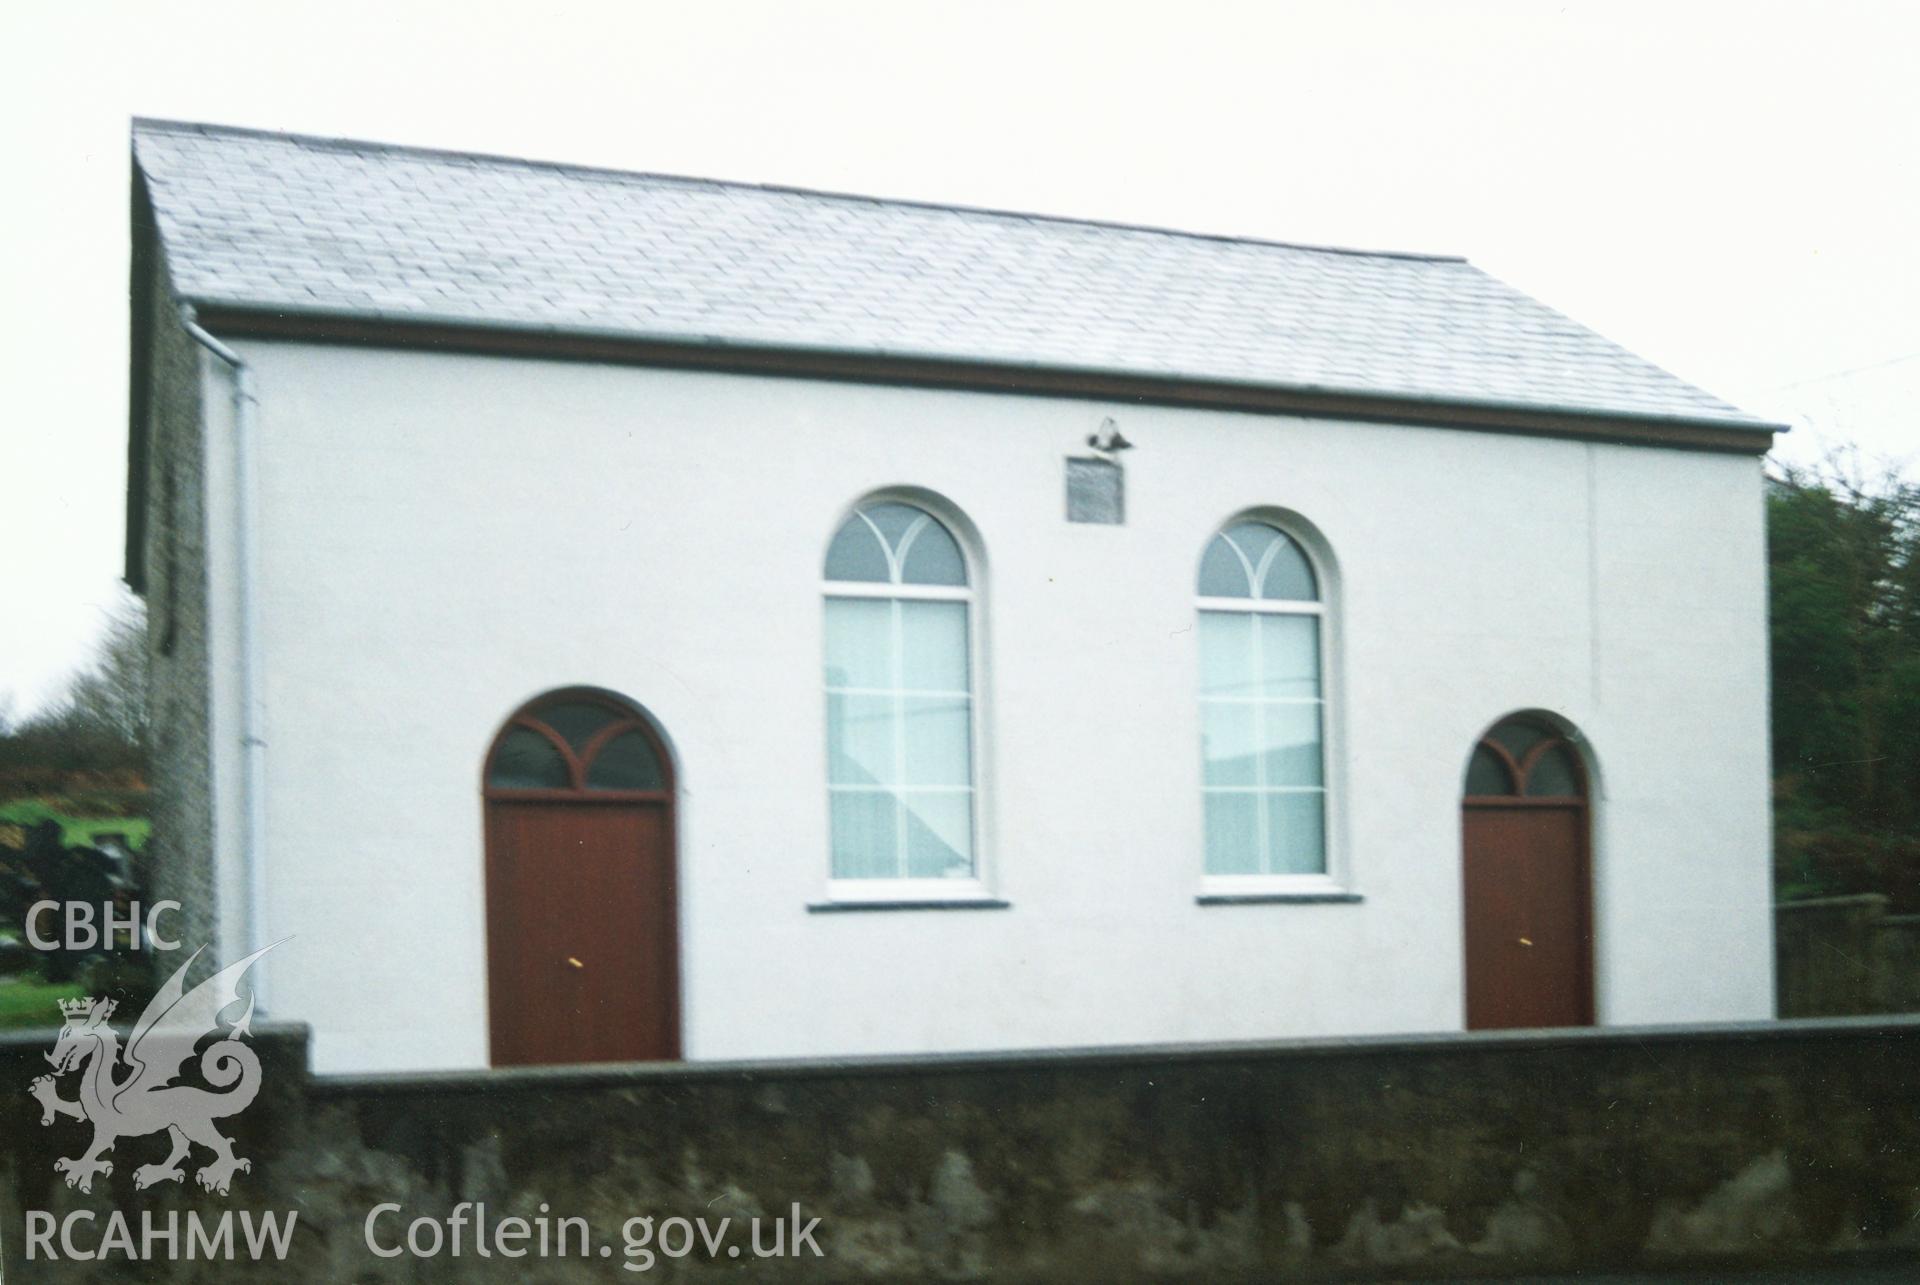 Digital copy of a colour photograph showing an exterior view of Cribyn Welsh Unitarian Chapel, taken by Robert Scourfield, c.1996.